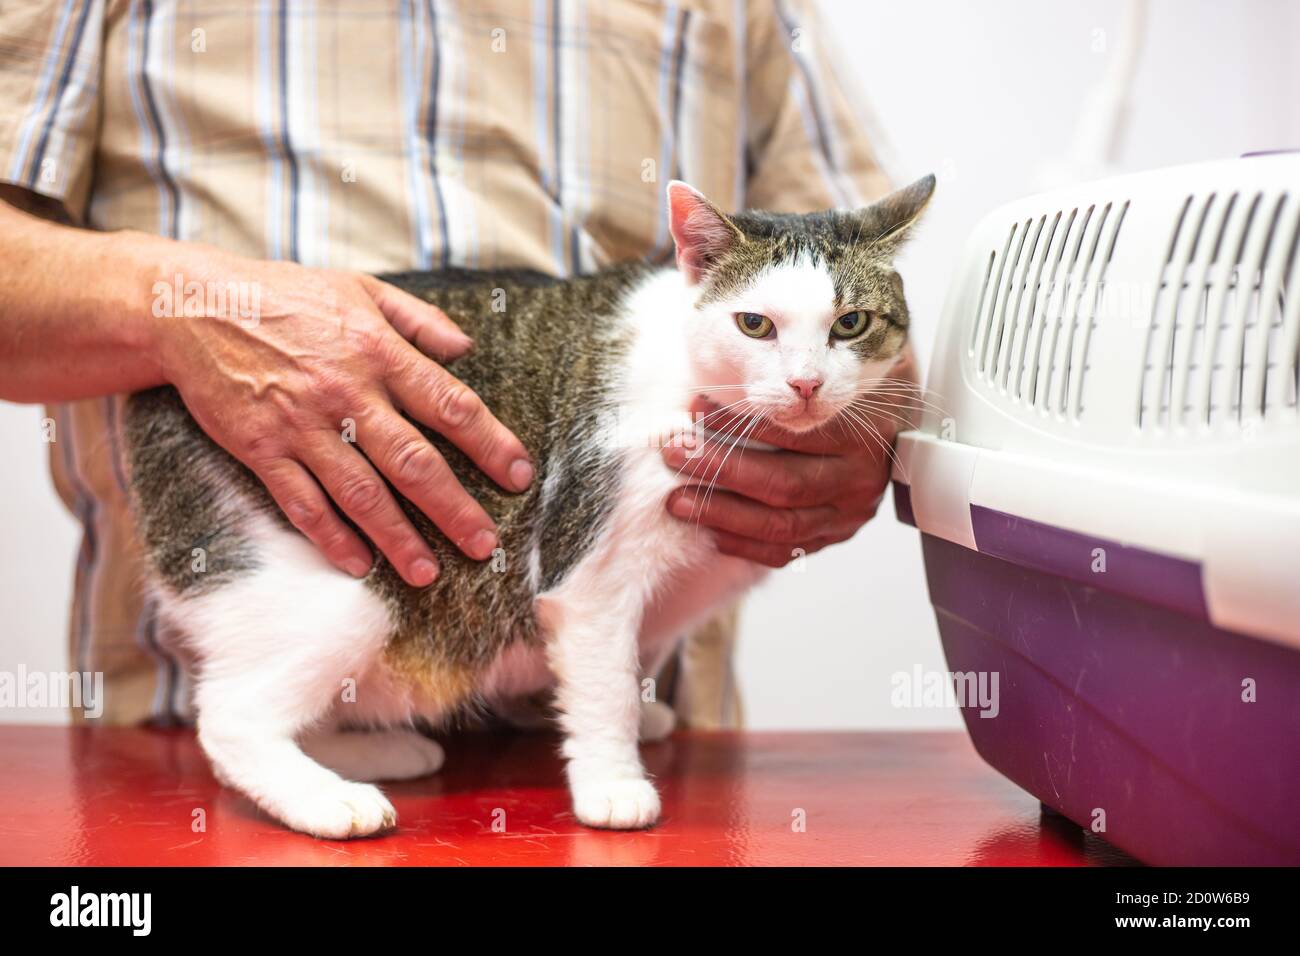 Preventive control of a cat at a veterinary clinic, animal concept Stock Photo